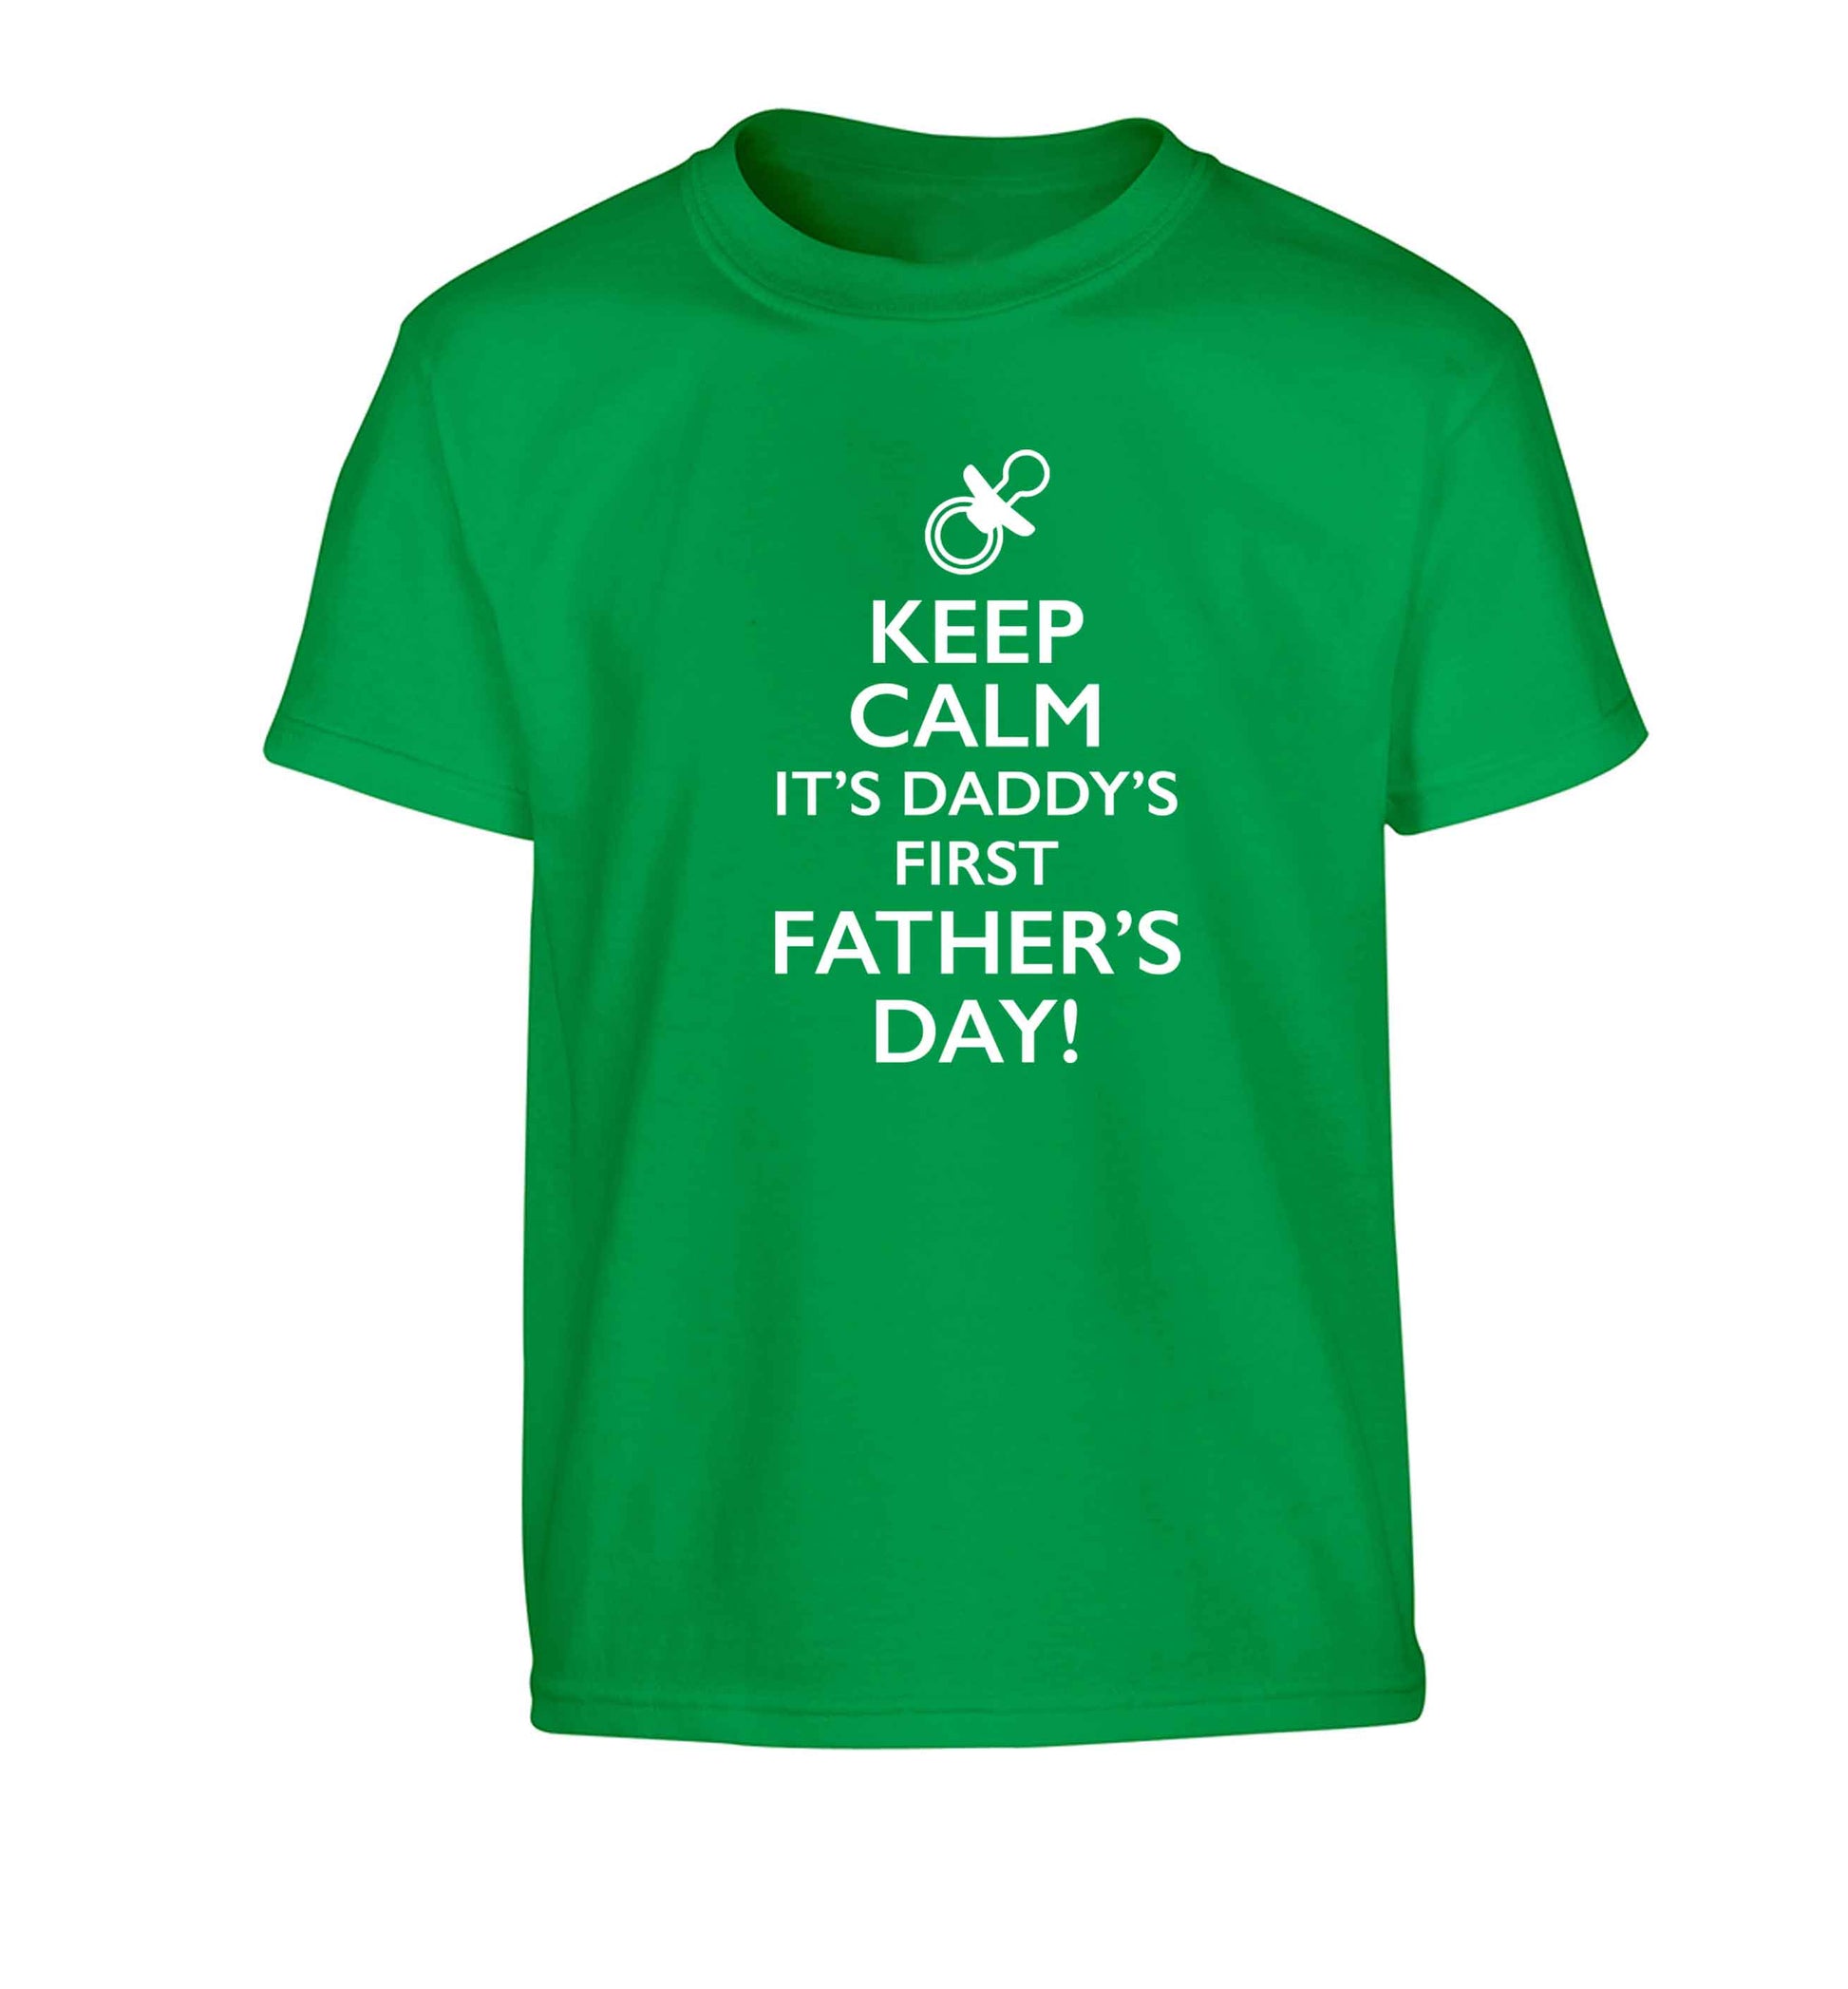 Keep calm it's daddys first father's day Children's green Tshirt 12-13 Years